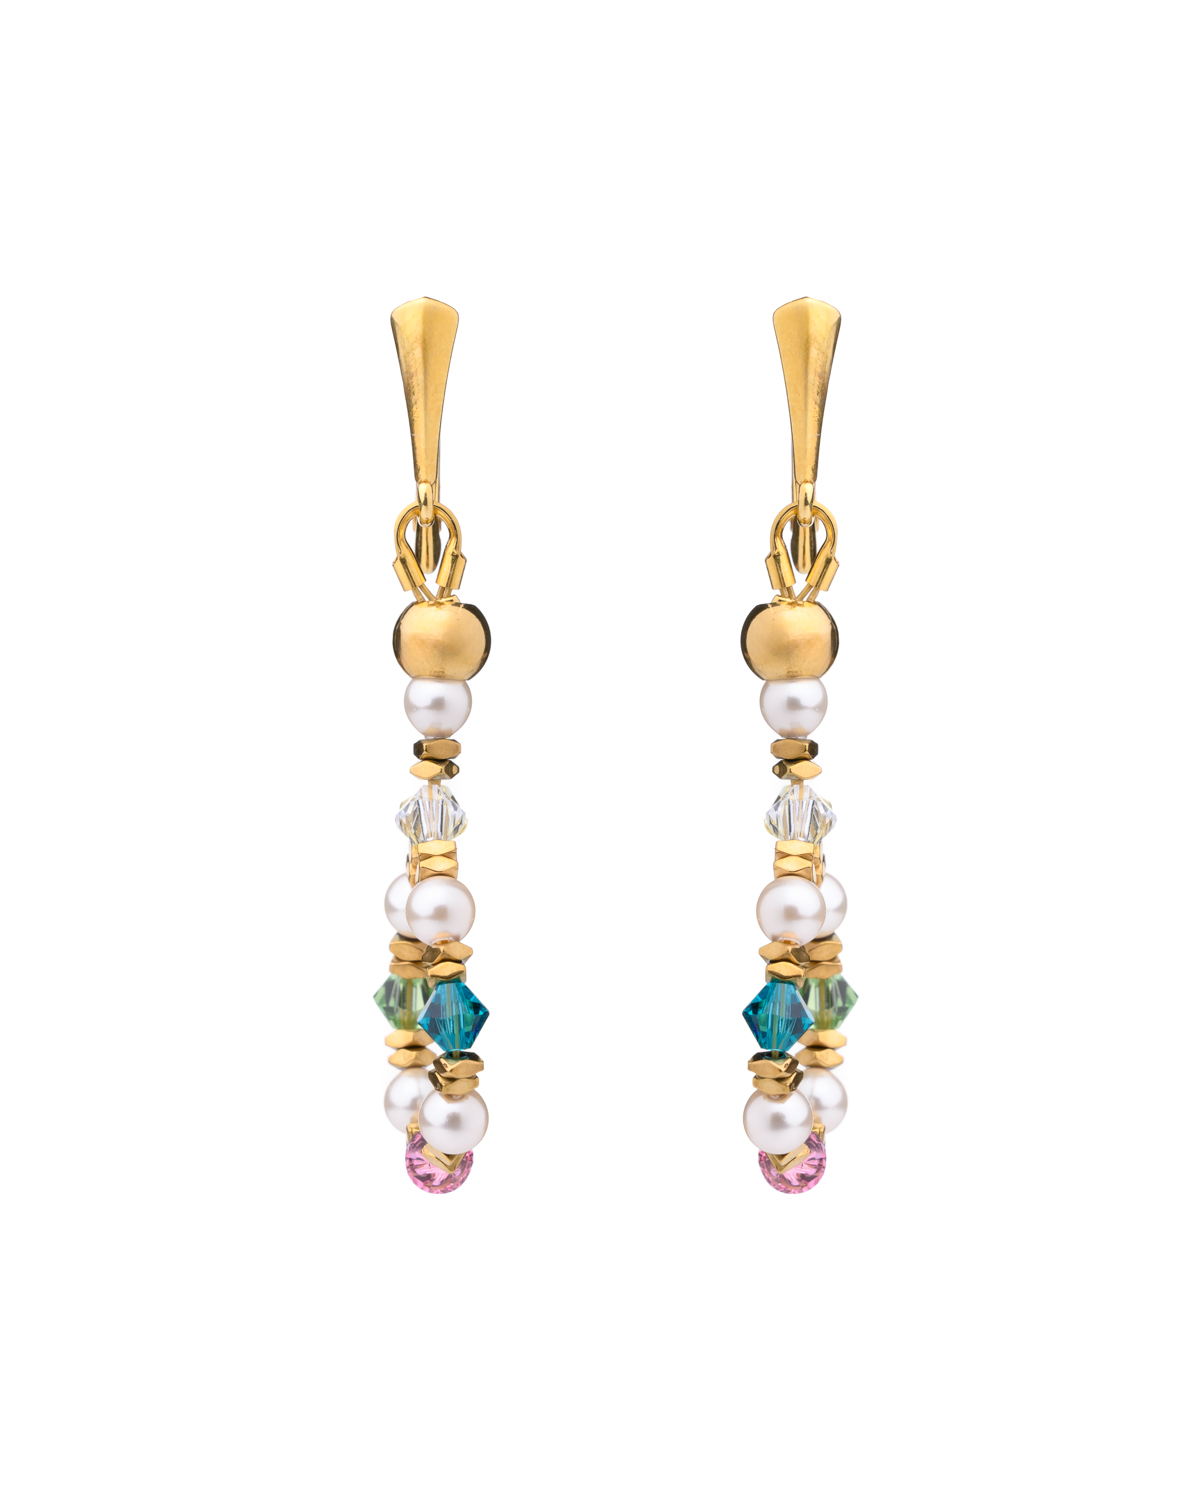 Crystal and Pearls long Earrings - Mulicolor